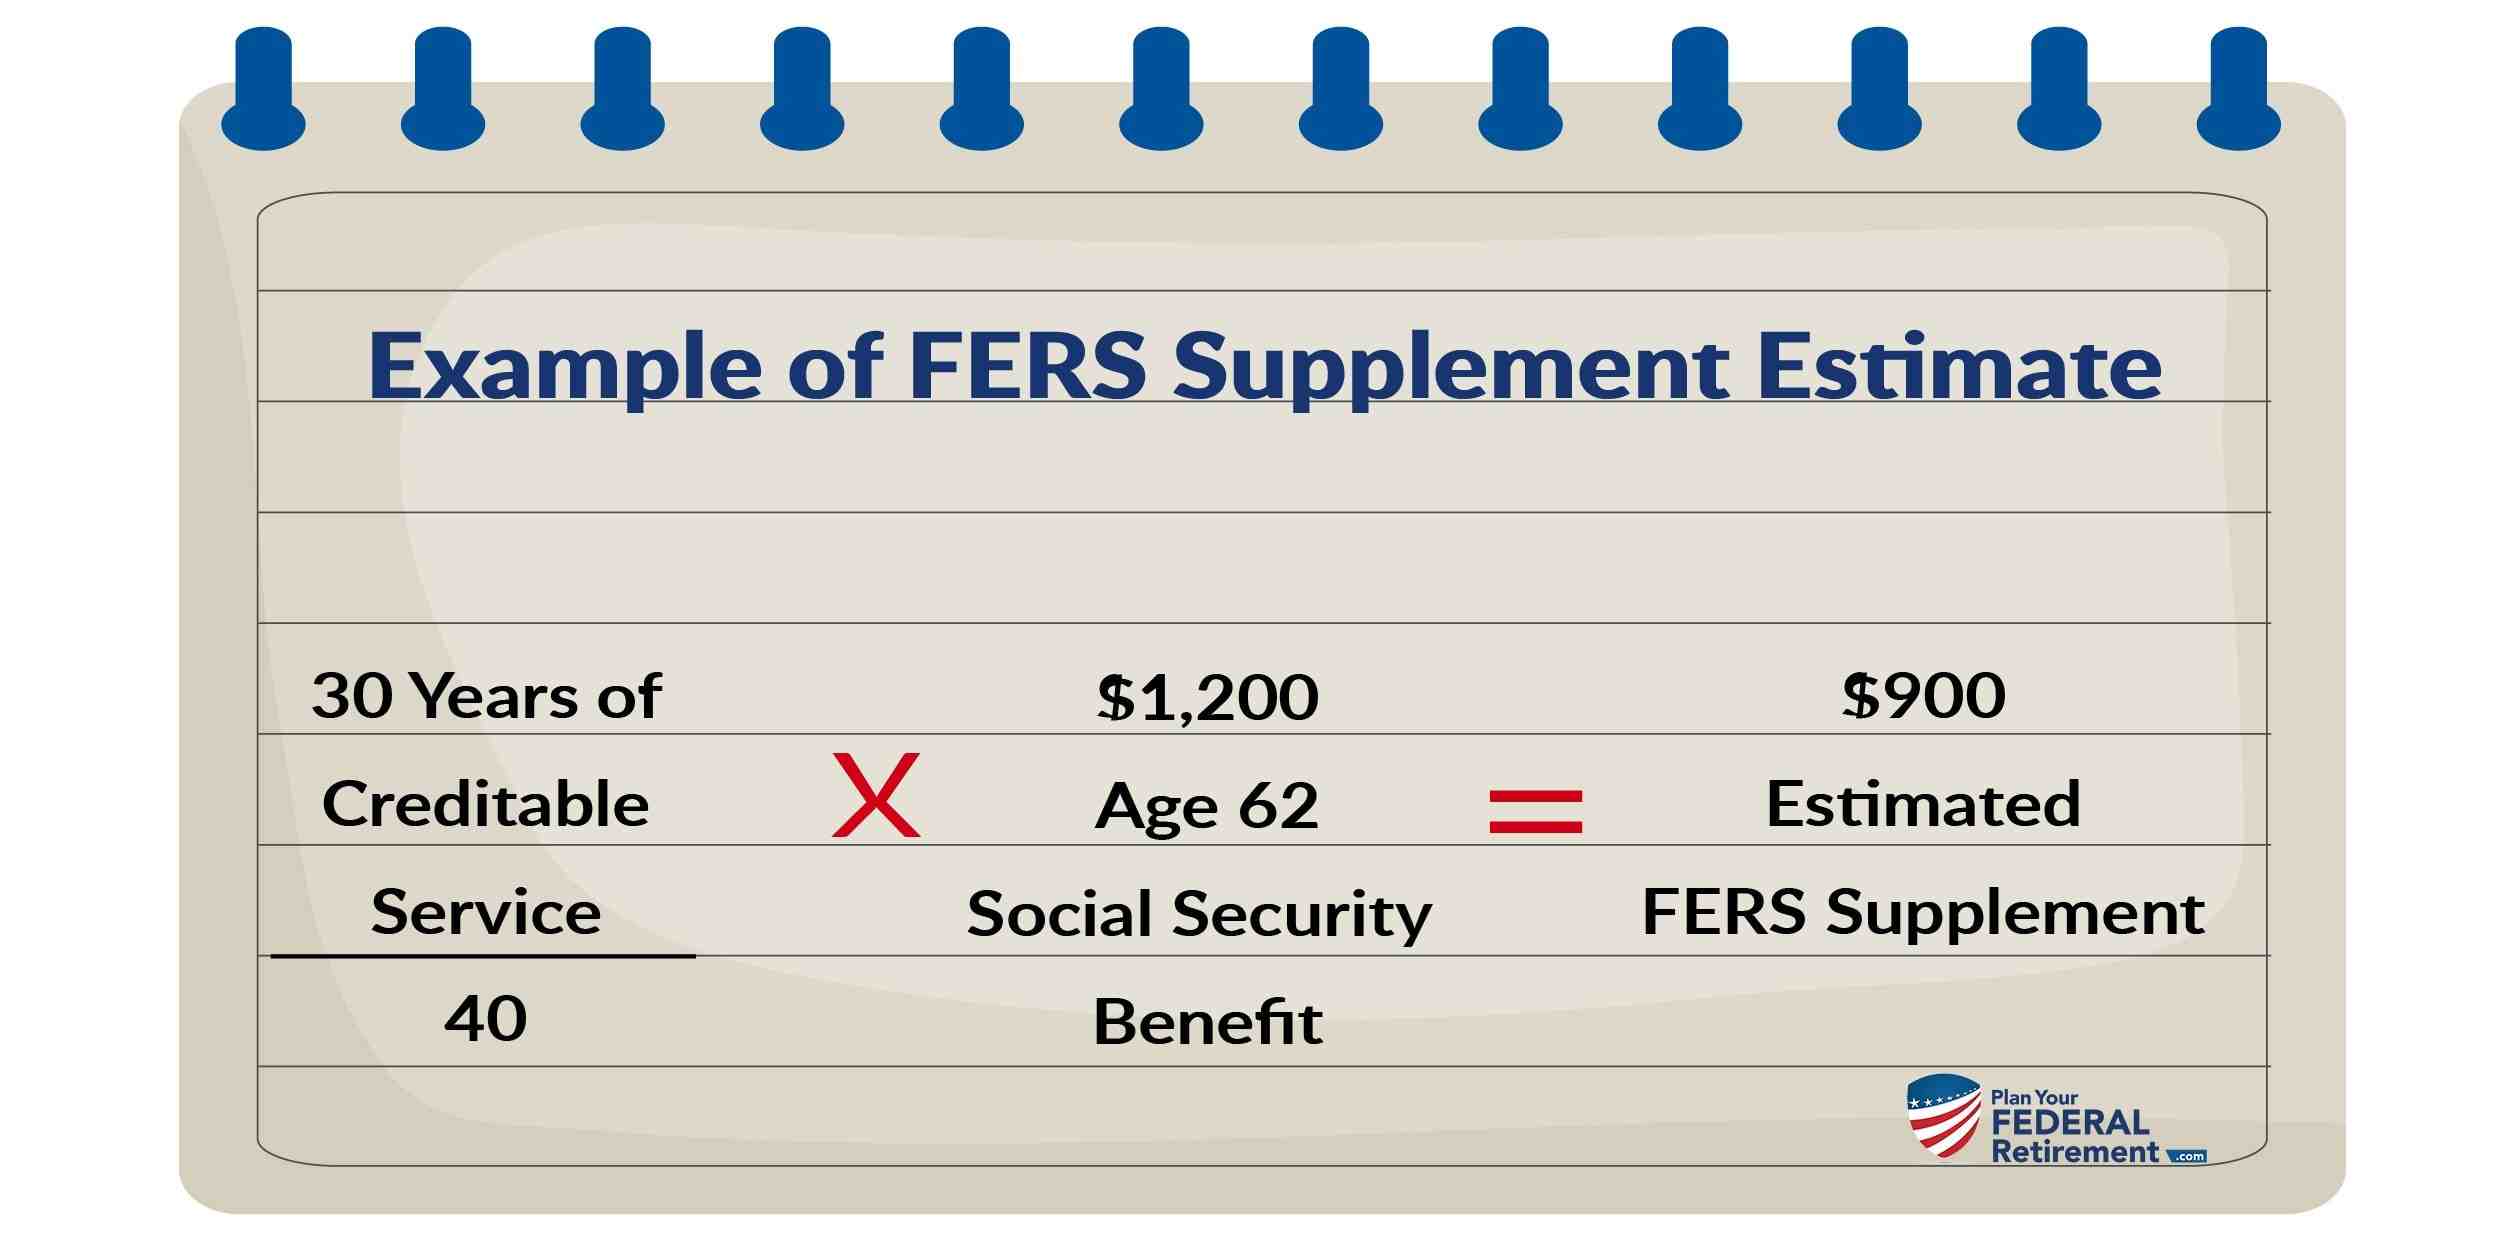 How are FERS monthly payments calculated?